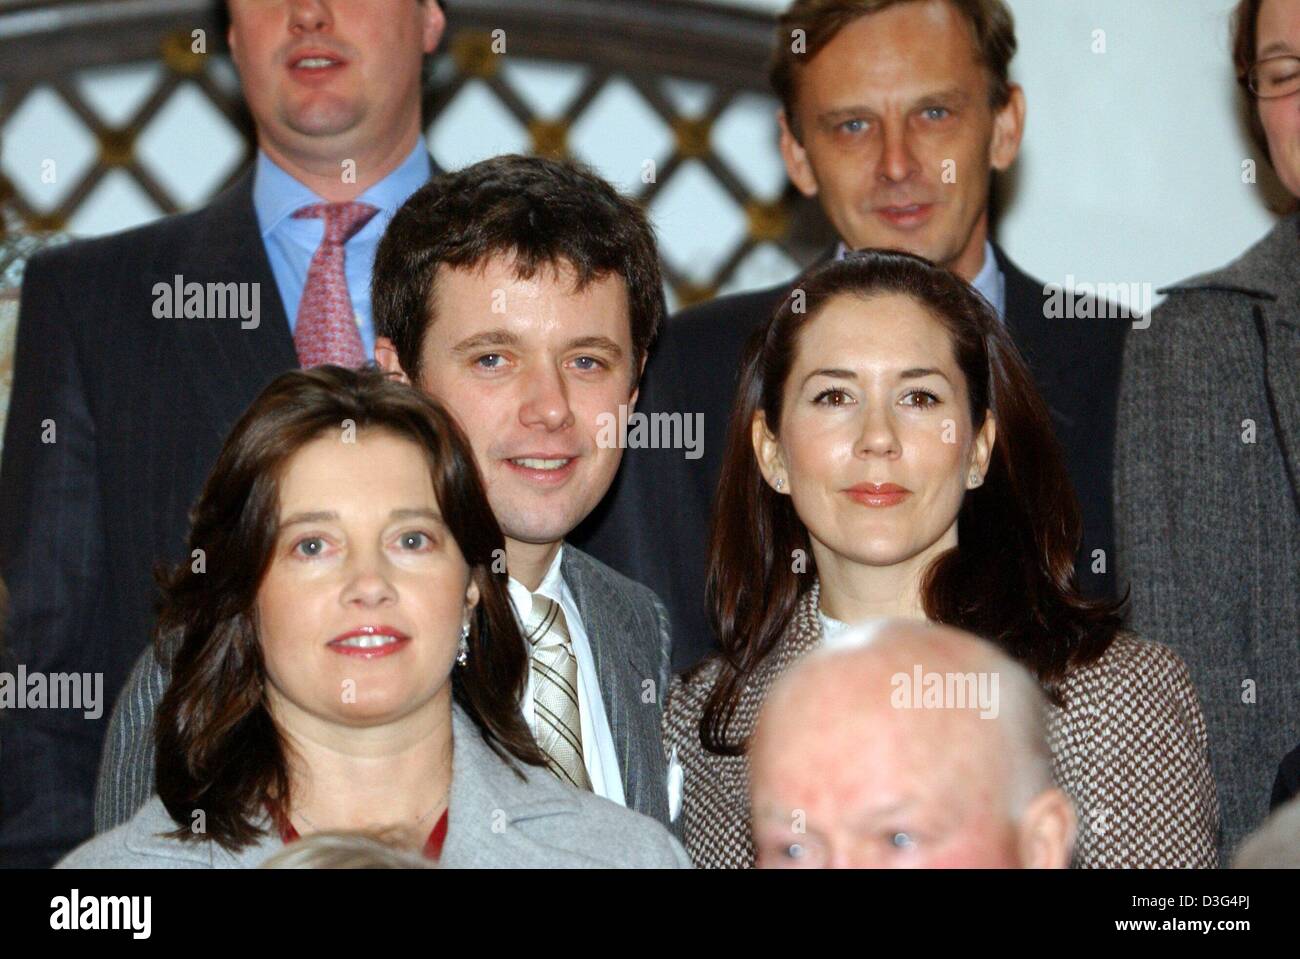 dpa-crown-prince-frederik-of-denmark-and-his-fiancee-mary-donaldson-D3G4PJ.jpg